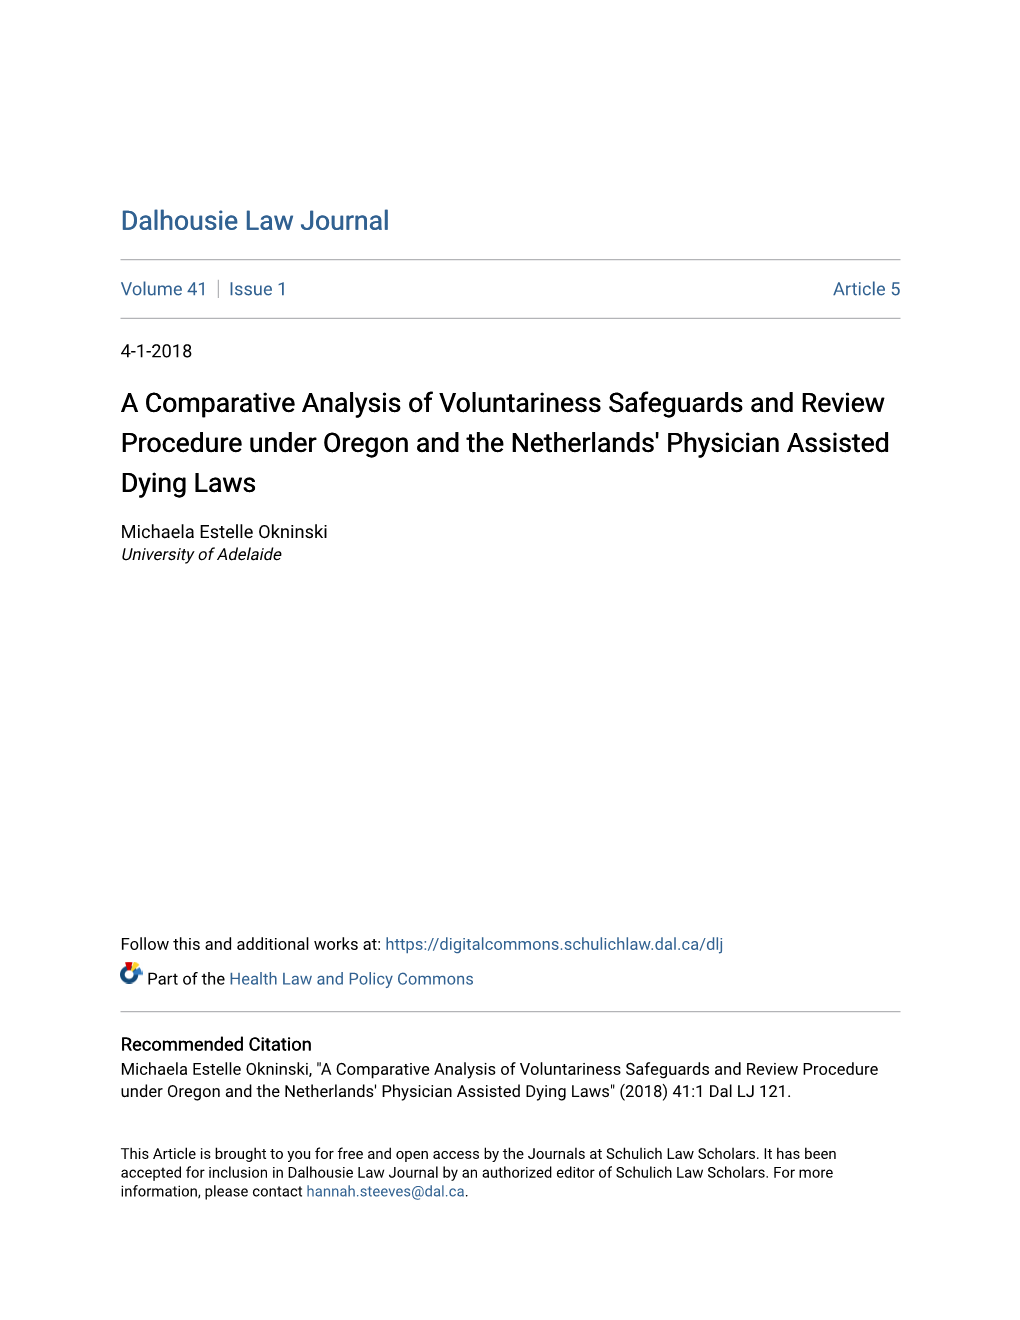 A Comparative Analysis of Voluntariness Safeguards and Review Procedure Under Oregon and the Netherlands' Physician Assisted Dying Laws